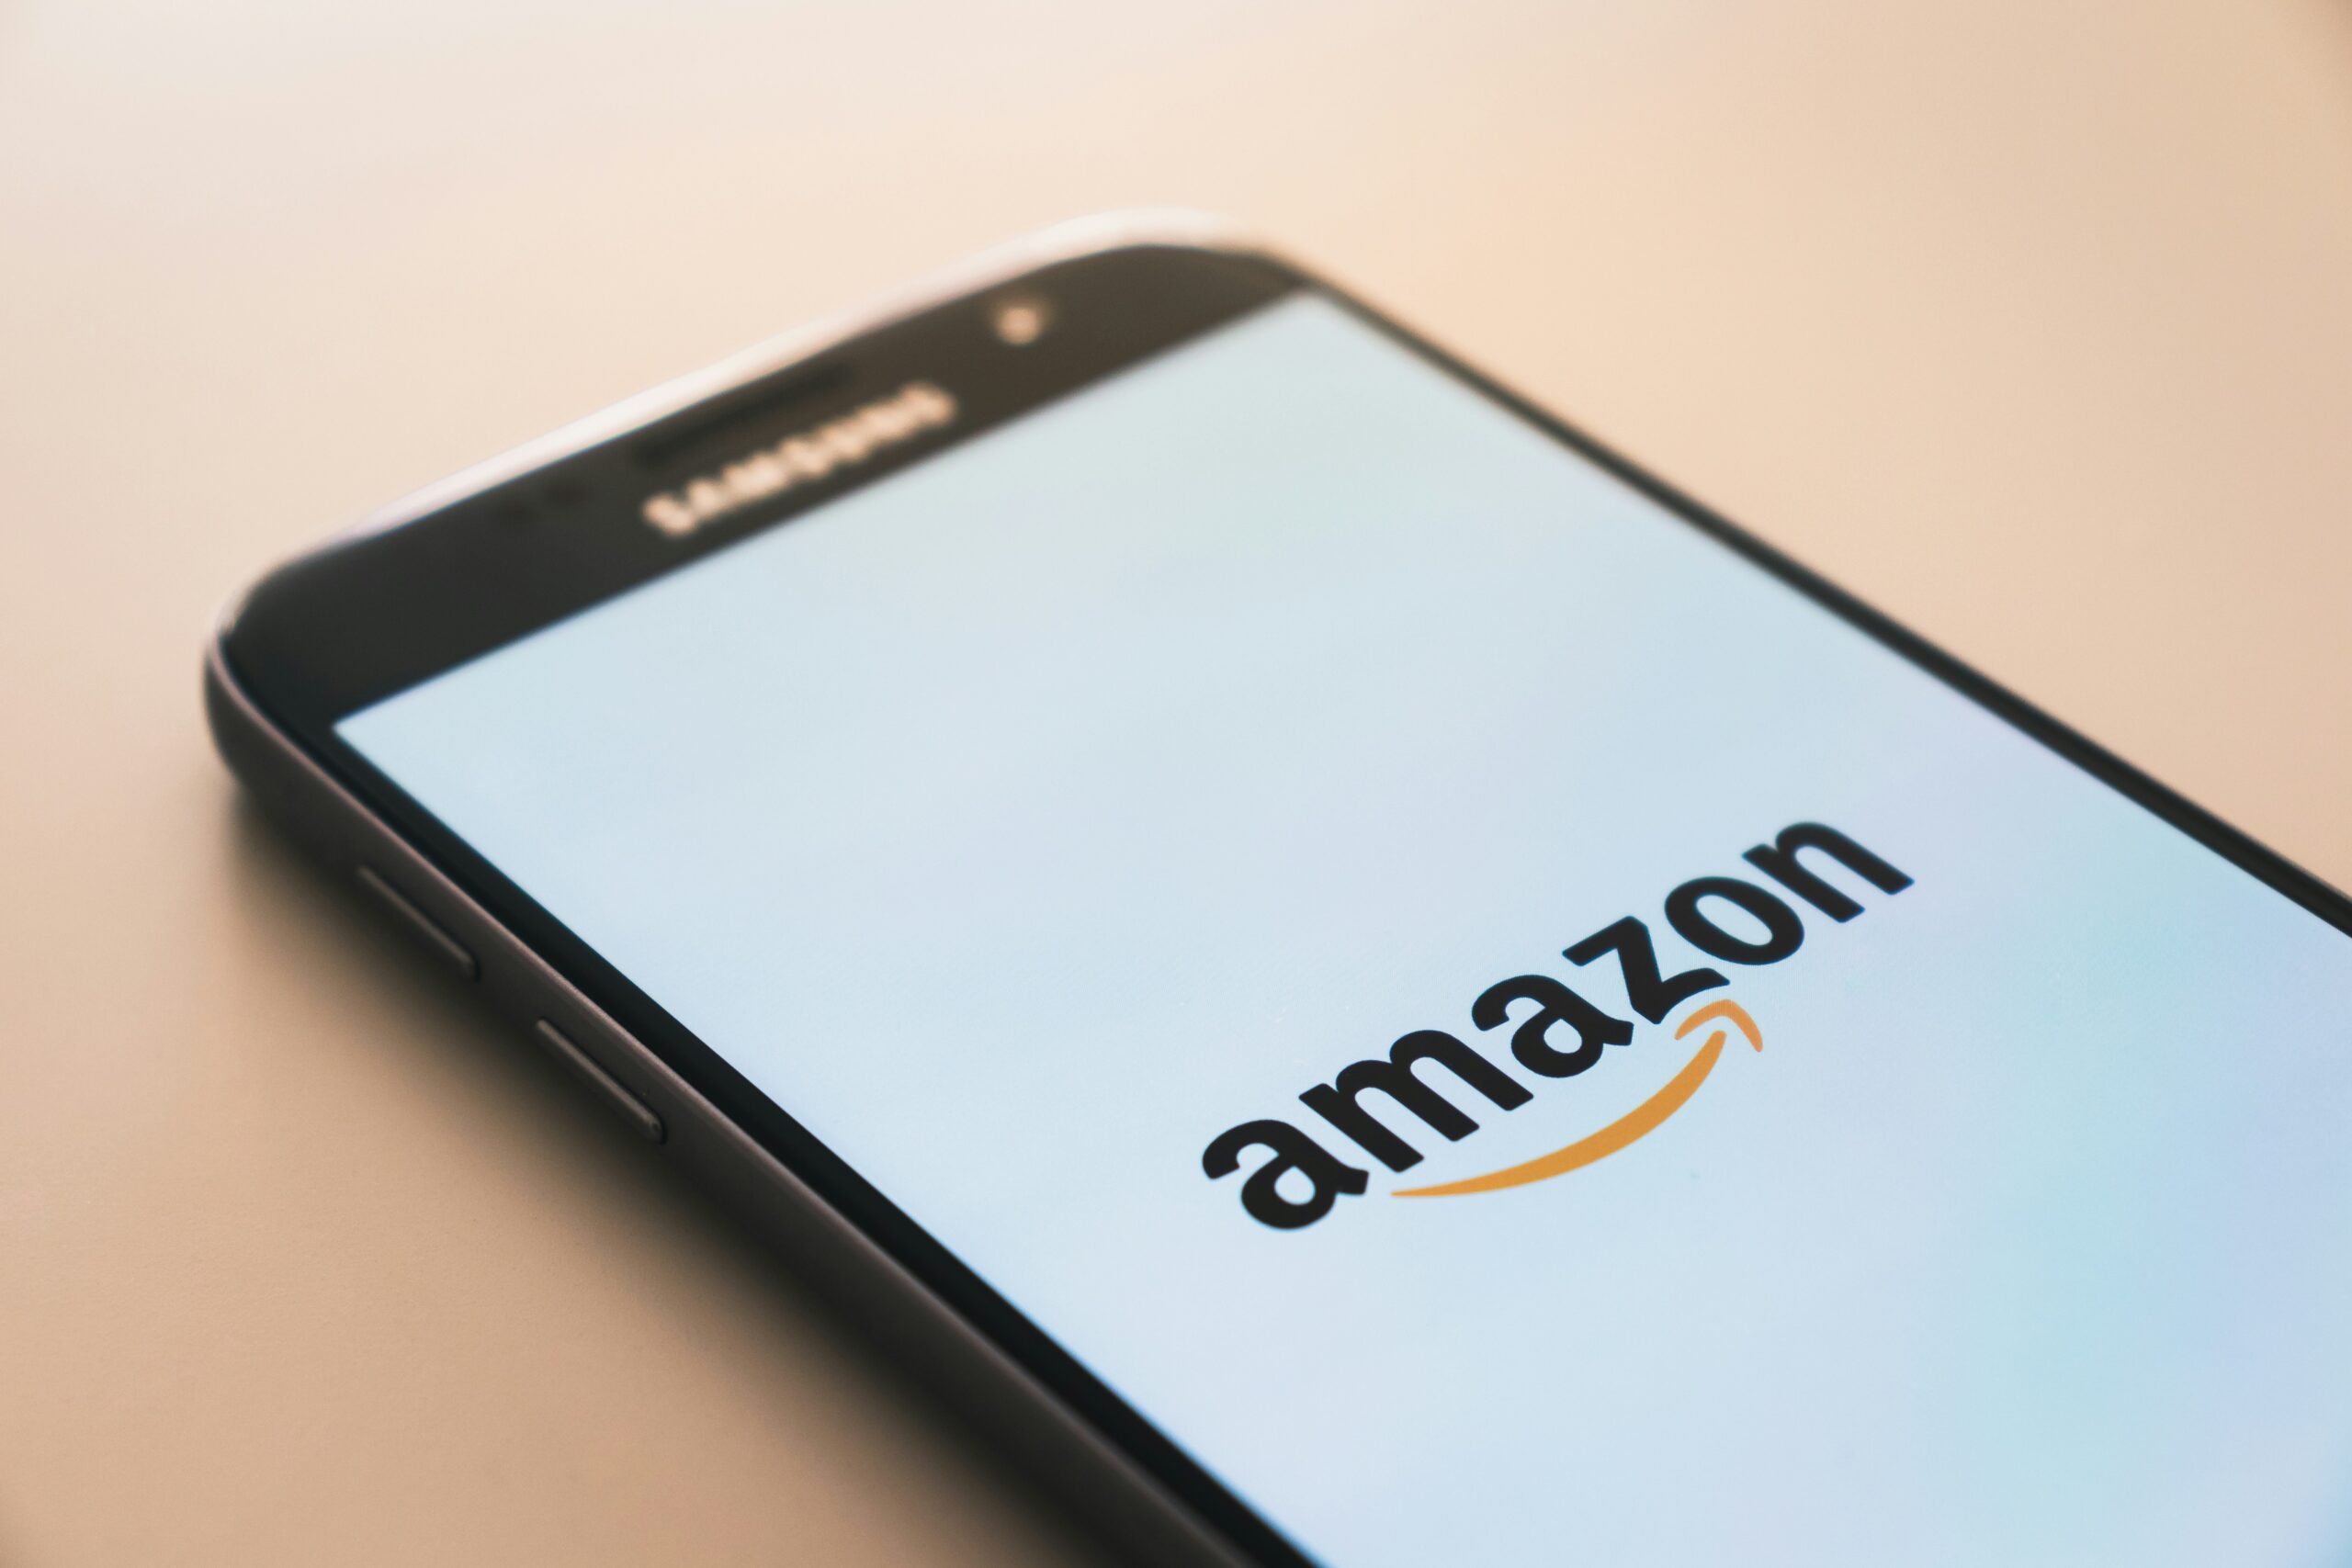 shop the best deals on amazon prime day 2024 and save big on a wide range of products. don't miss out on exclusive discounts and offers for prime members.